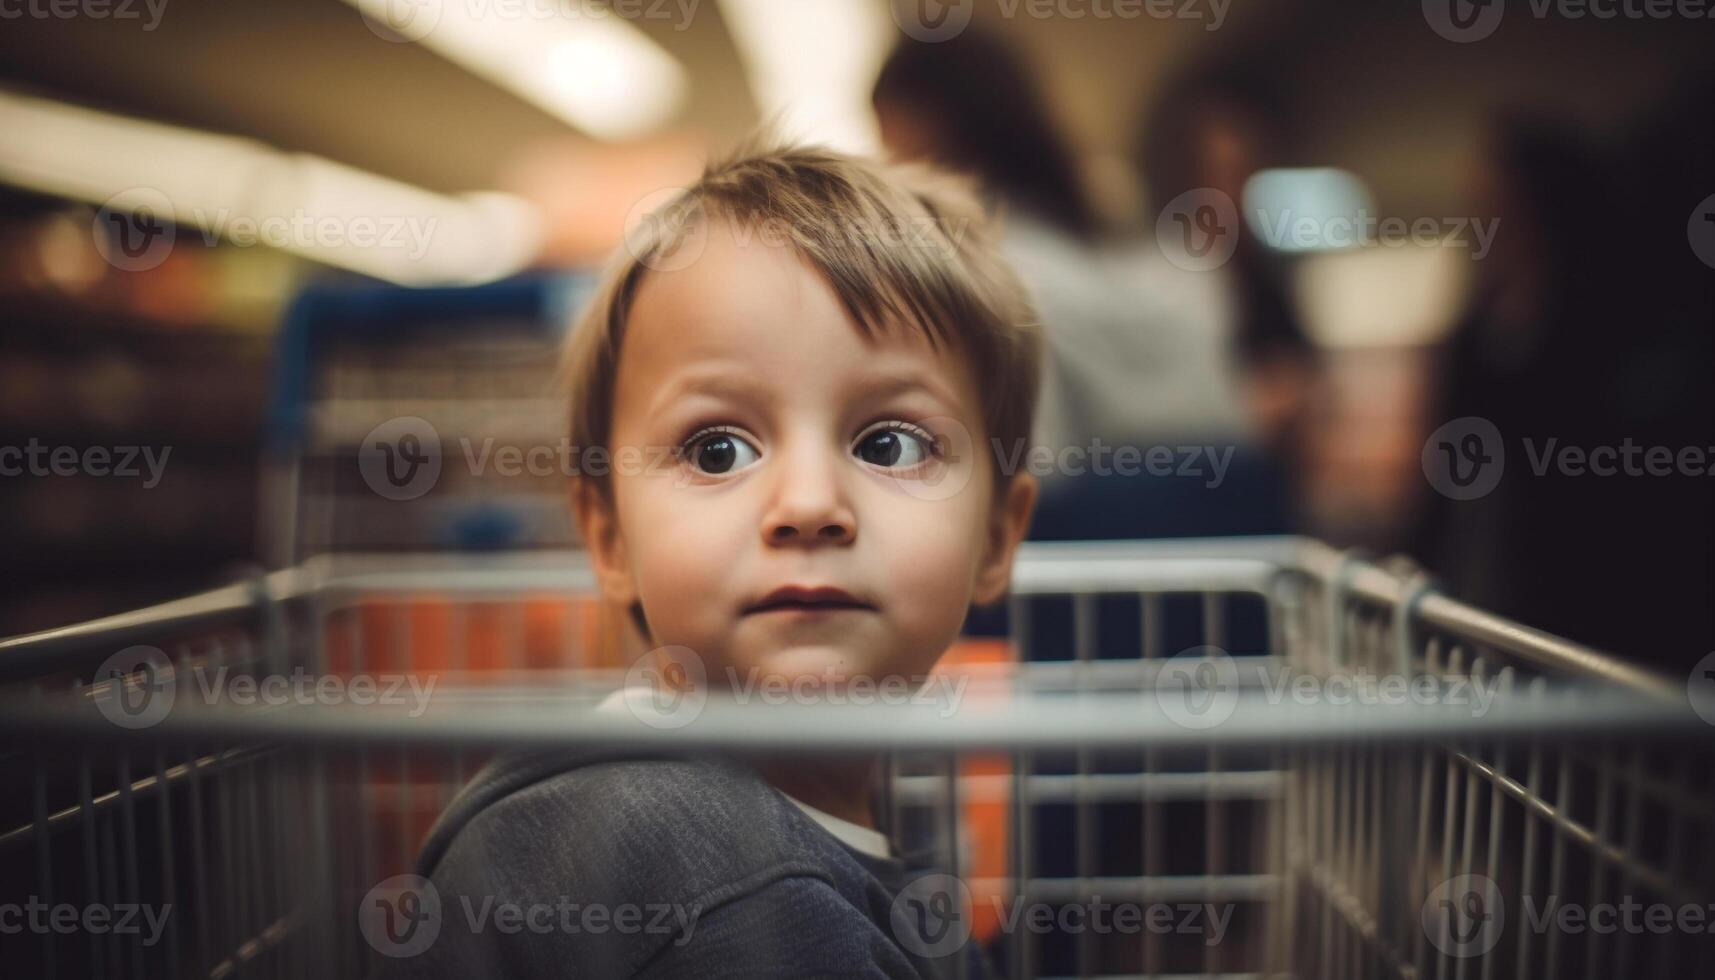 Smiling toddler holds food, looking at camera in supermarket shopping generated by AI photo